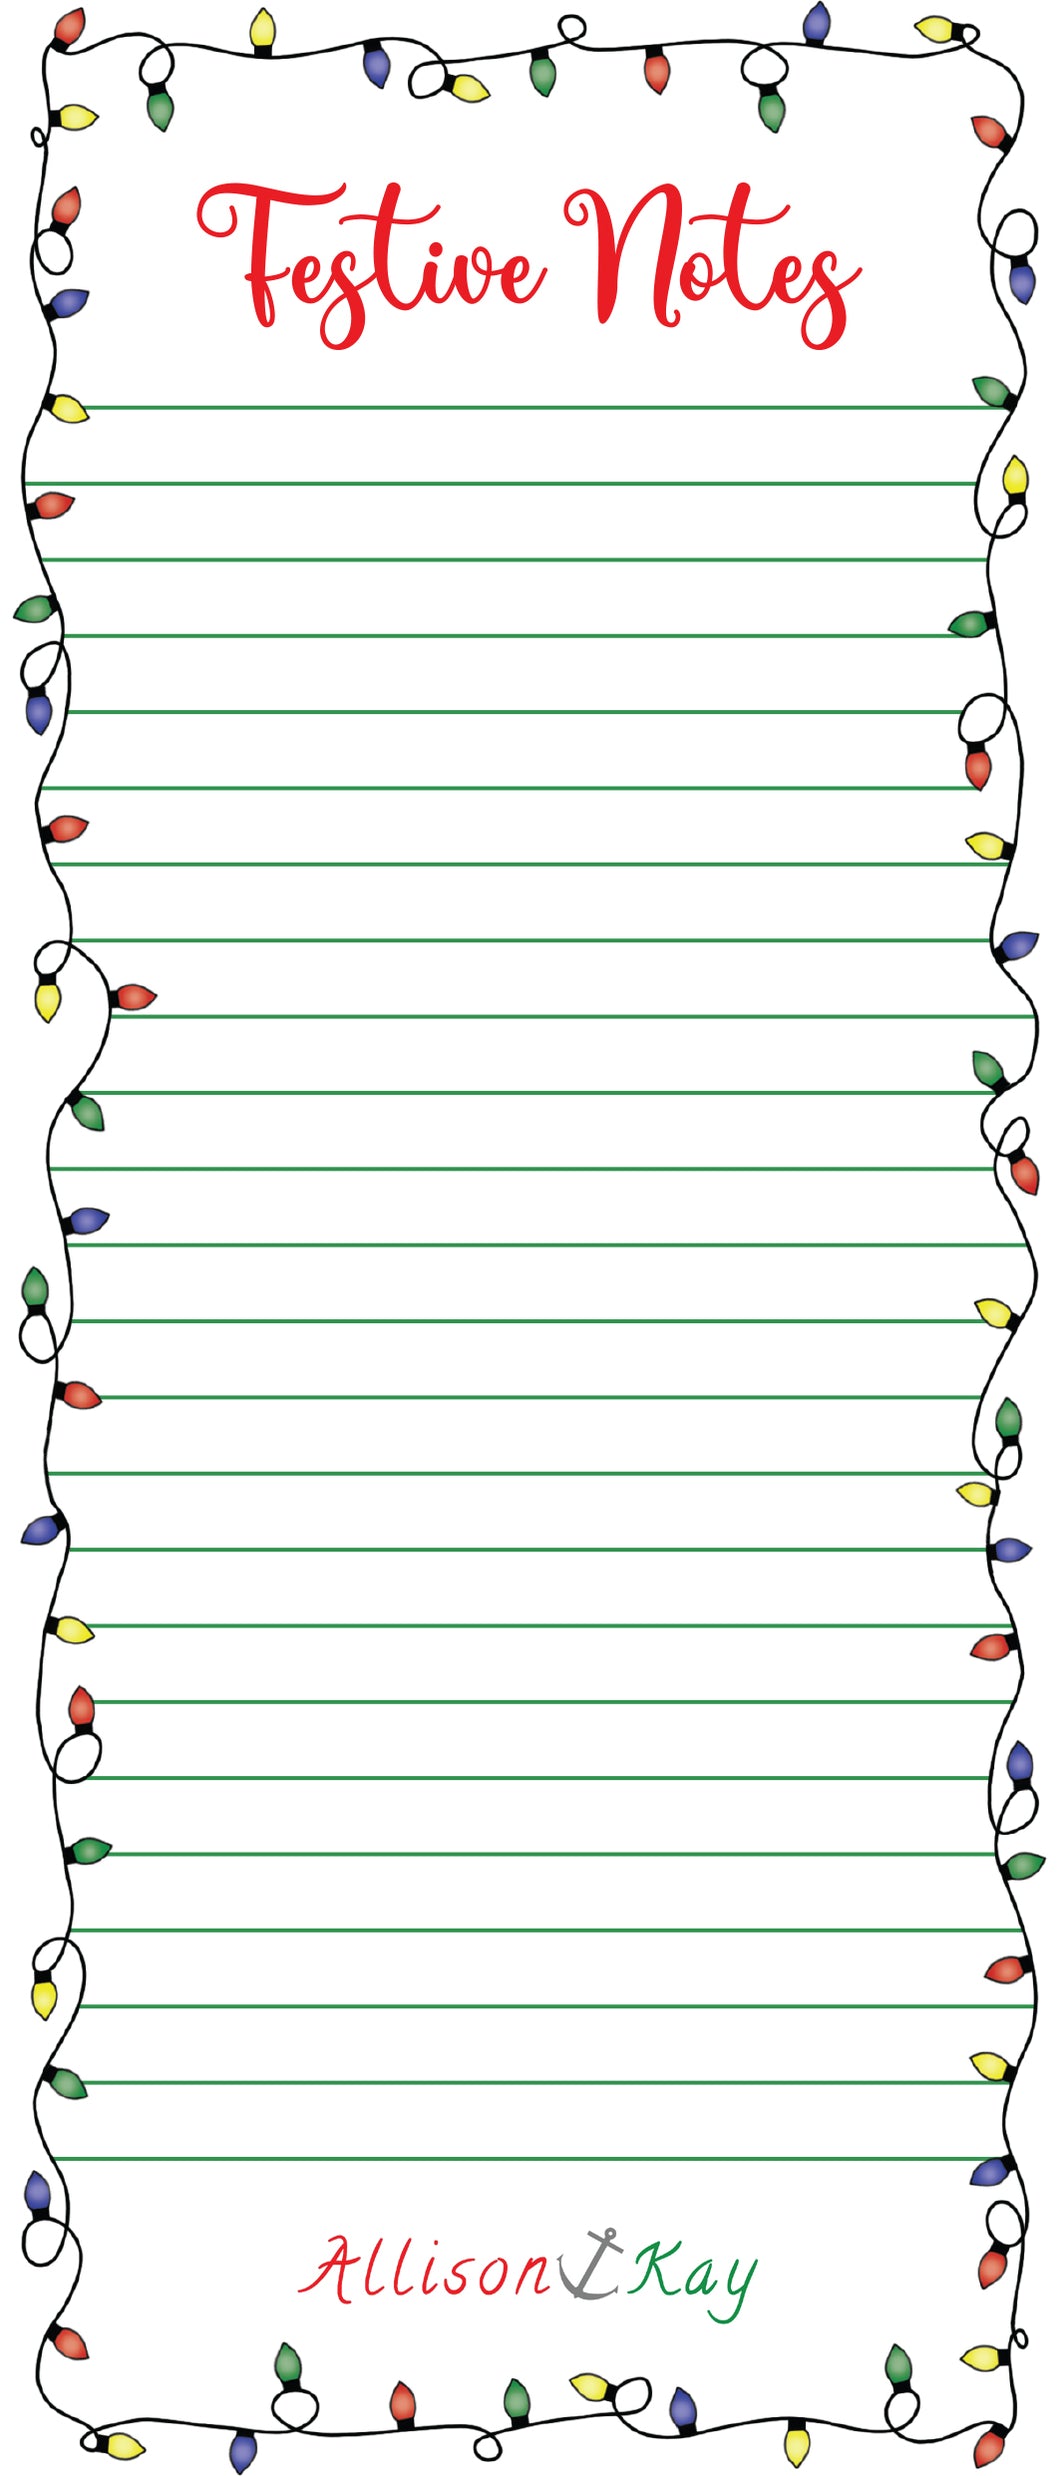 Festive Notes Multiple color Christmas Lights Notepad - 8.5x3.66in